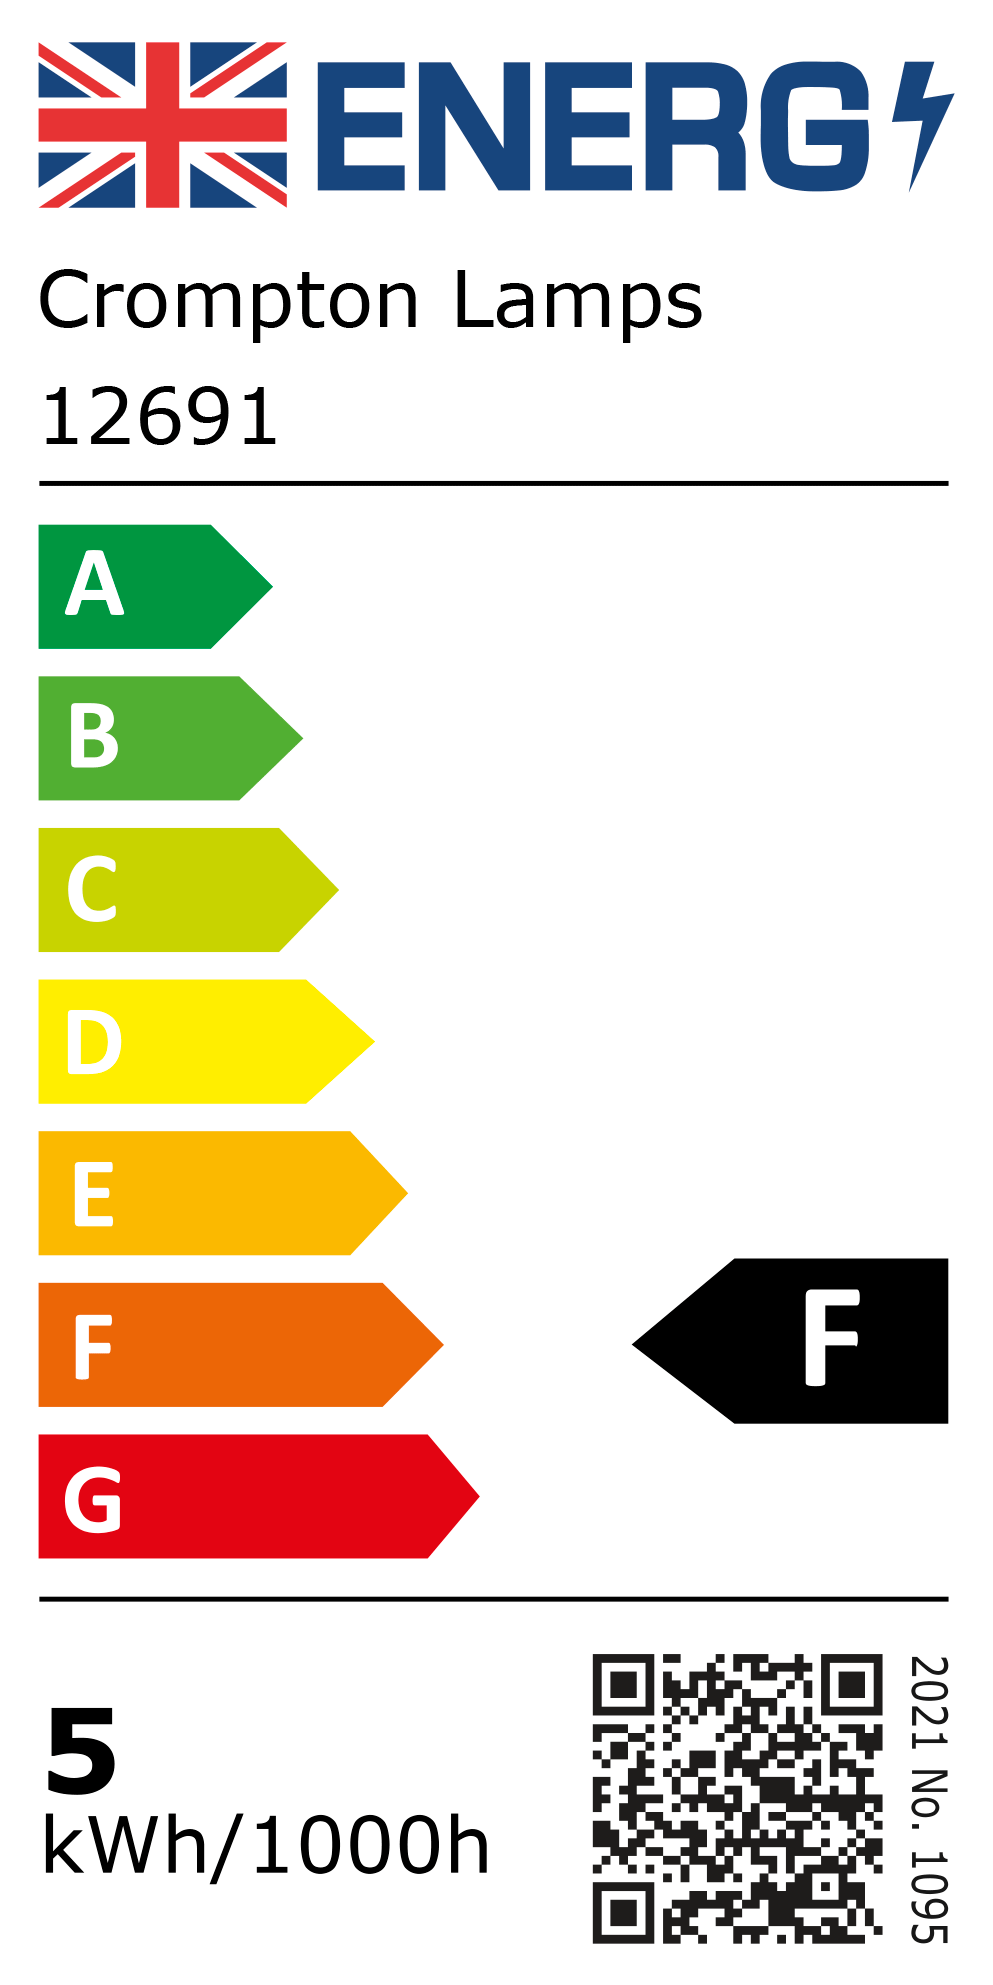 New 2021 Energy Rating Label: Stock Code 12691